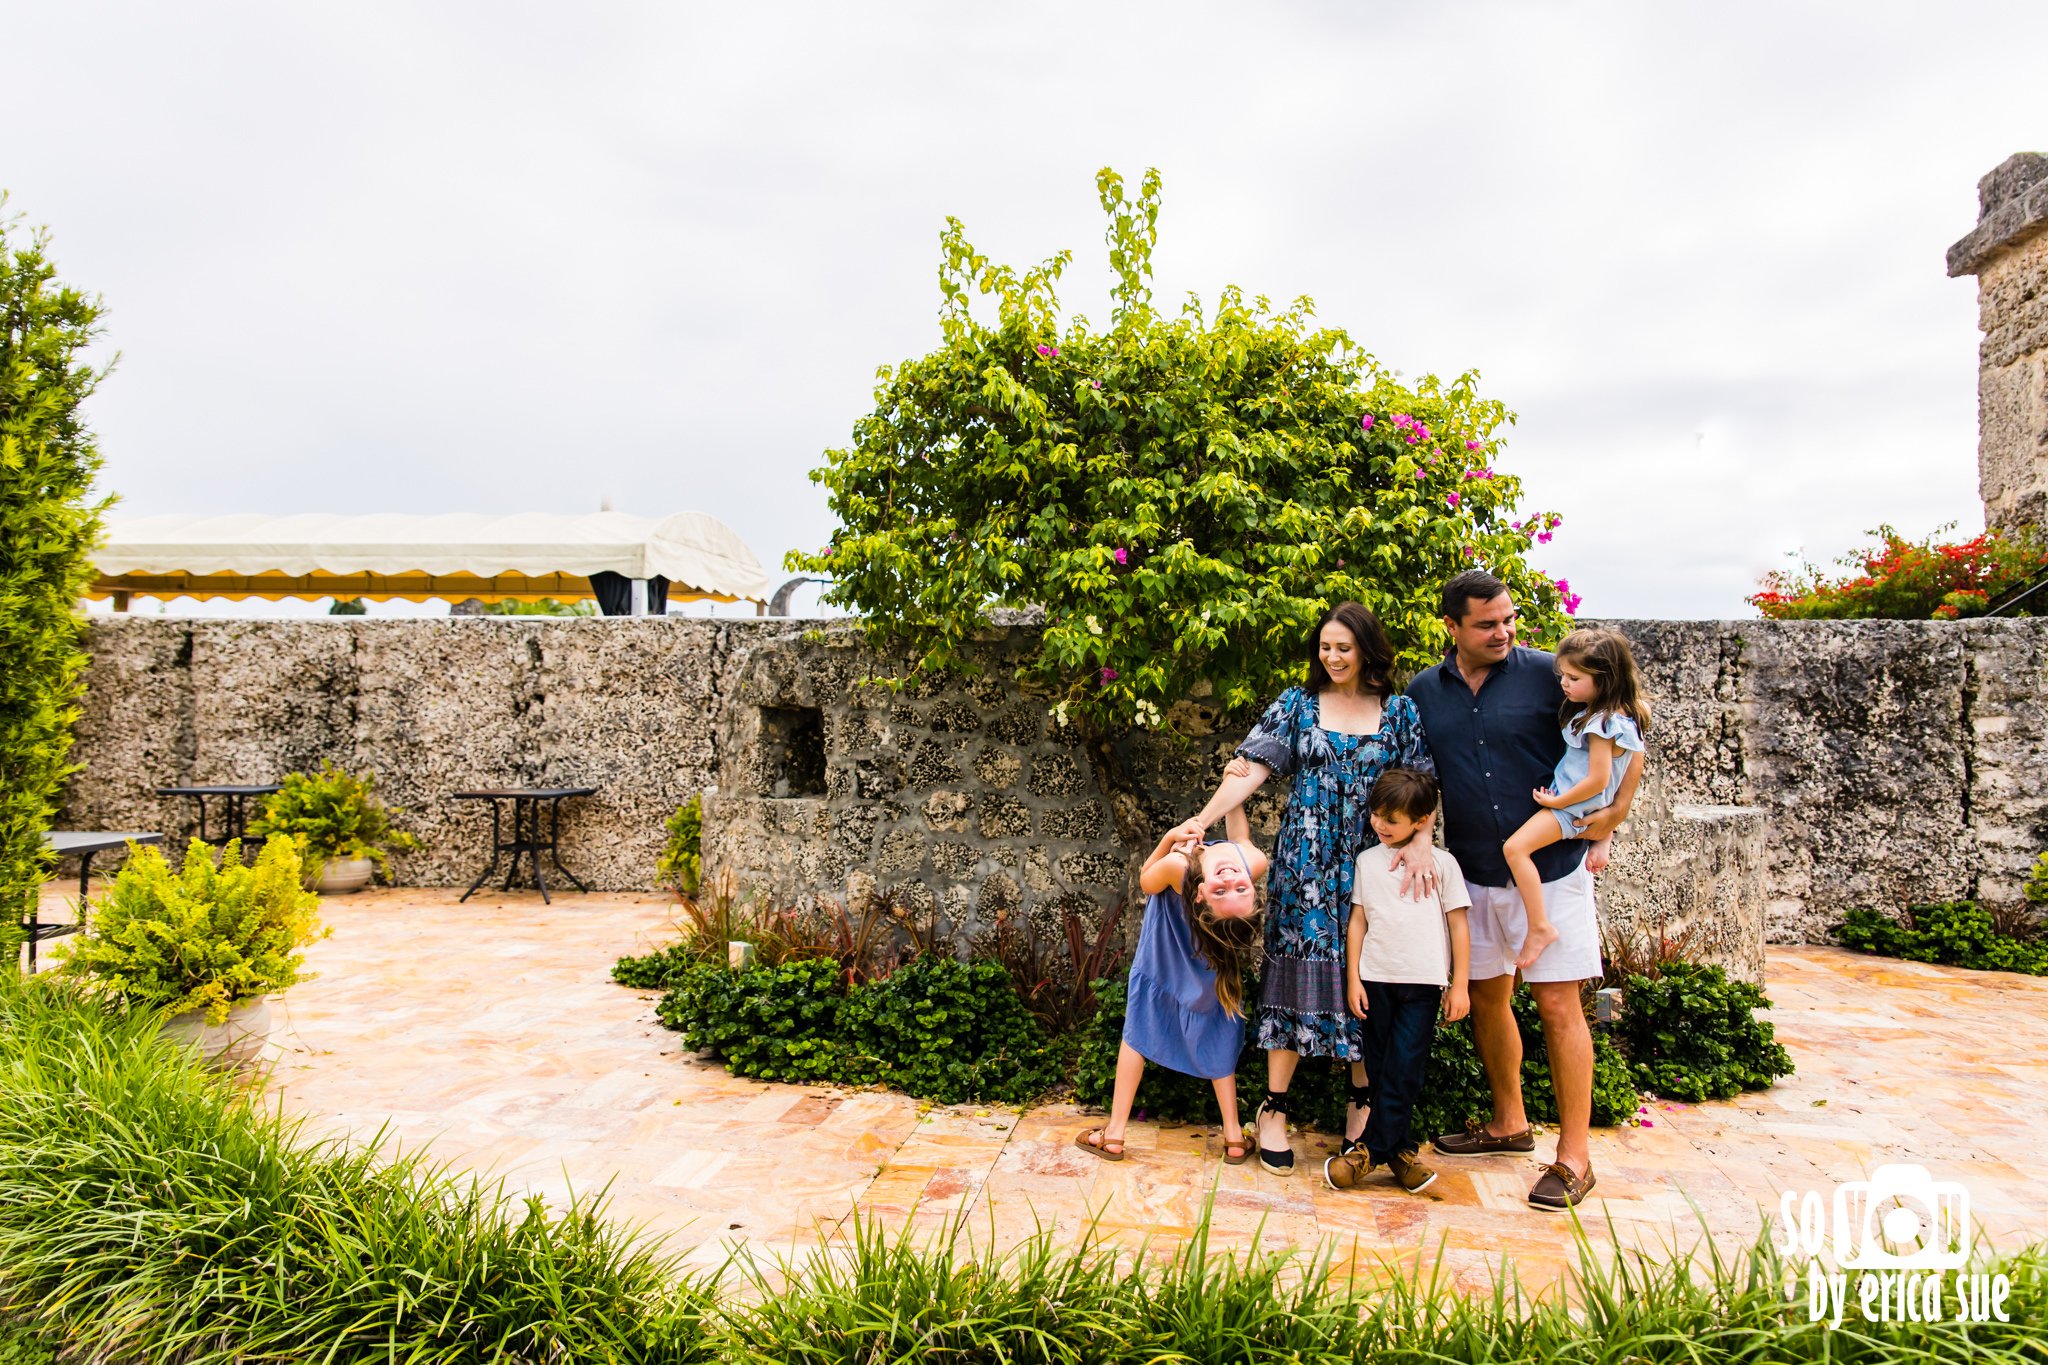 18-lifestyle-family-photographer-coral-castle-miami-fl-so-you-by-erica-sue-ES2_9413.jpg